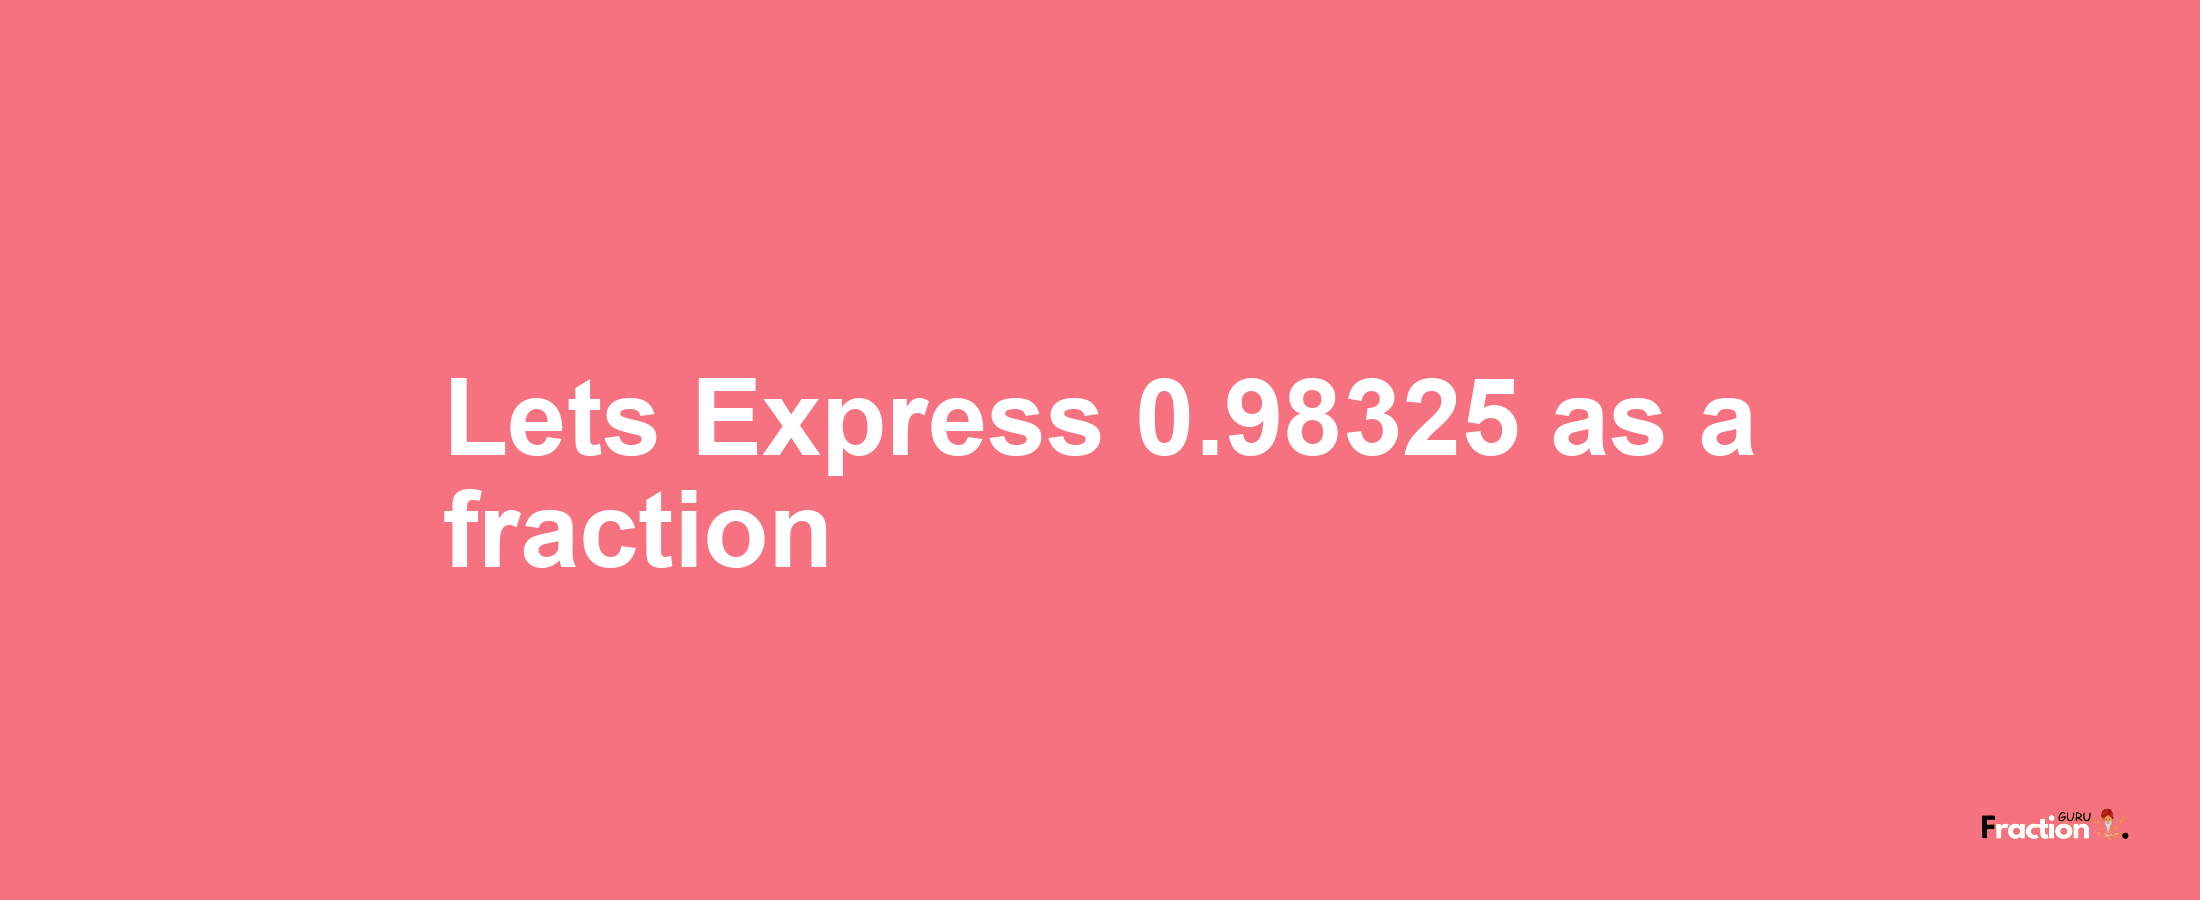 Lets Express 0.98325 as afraction